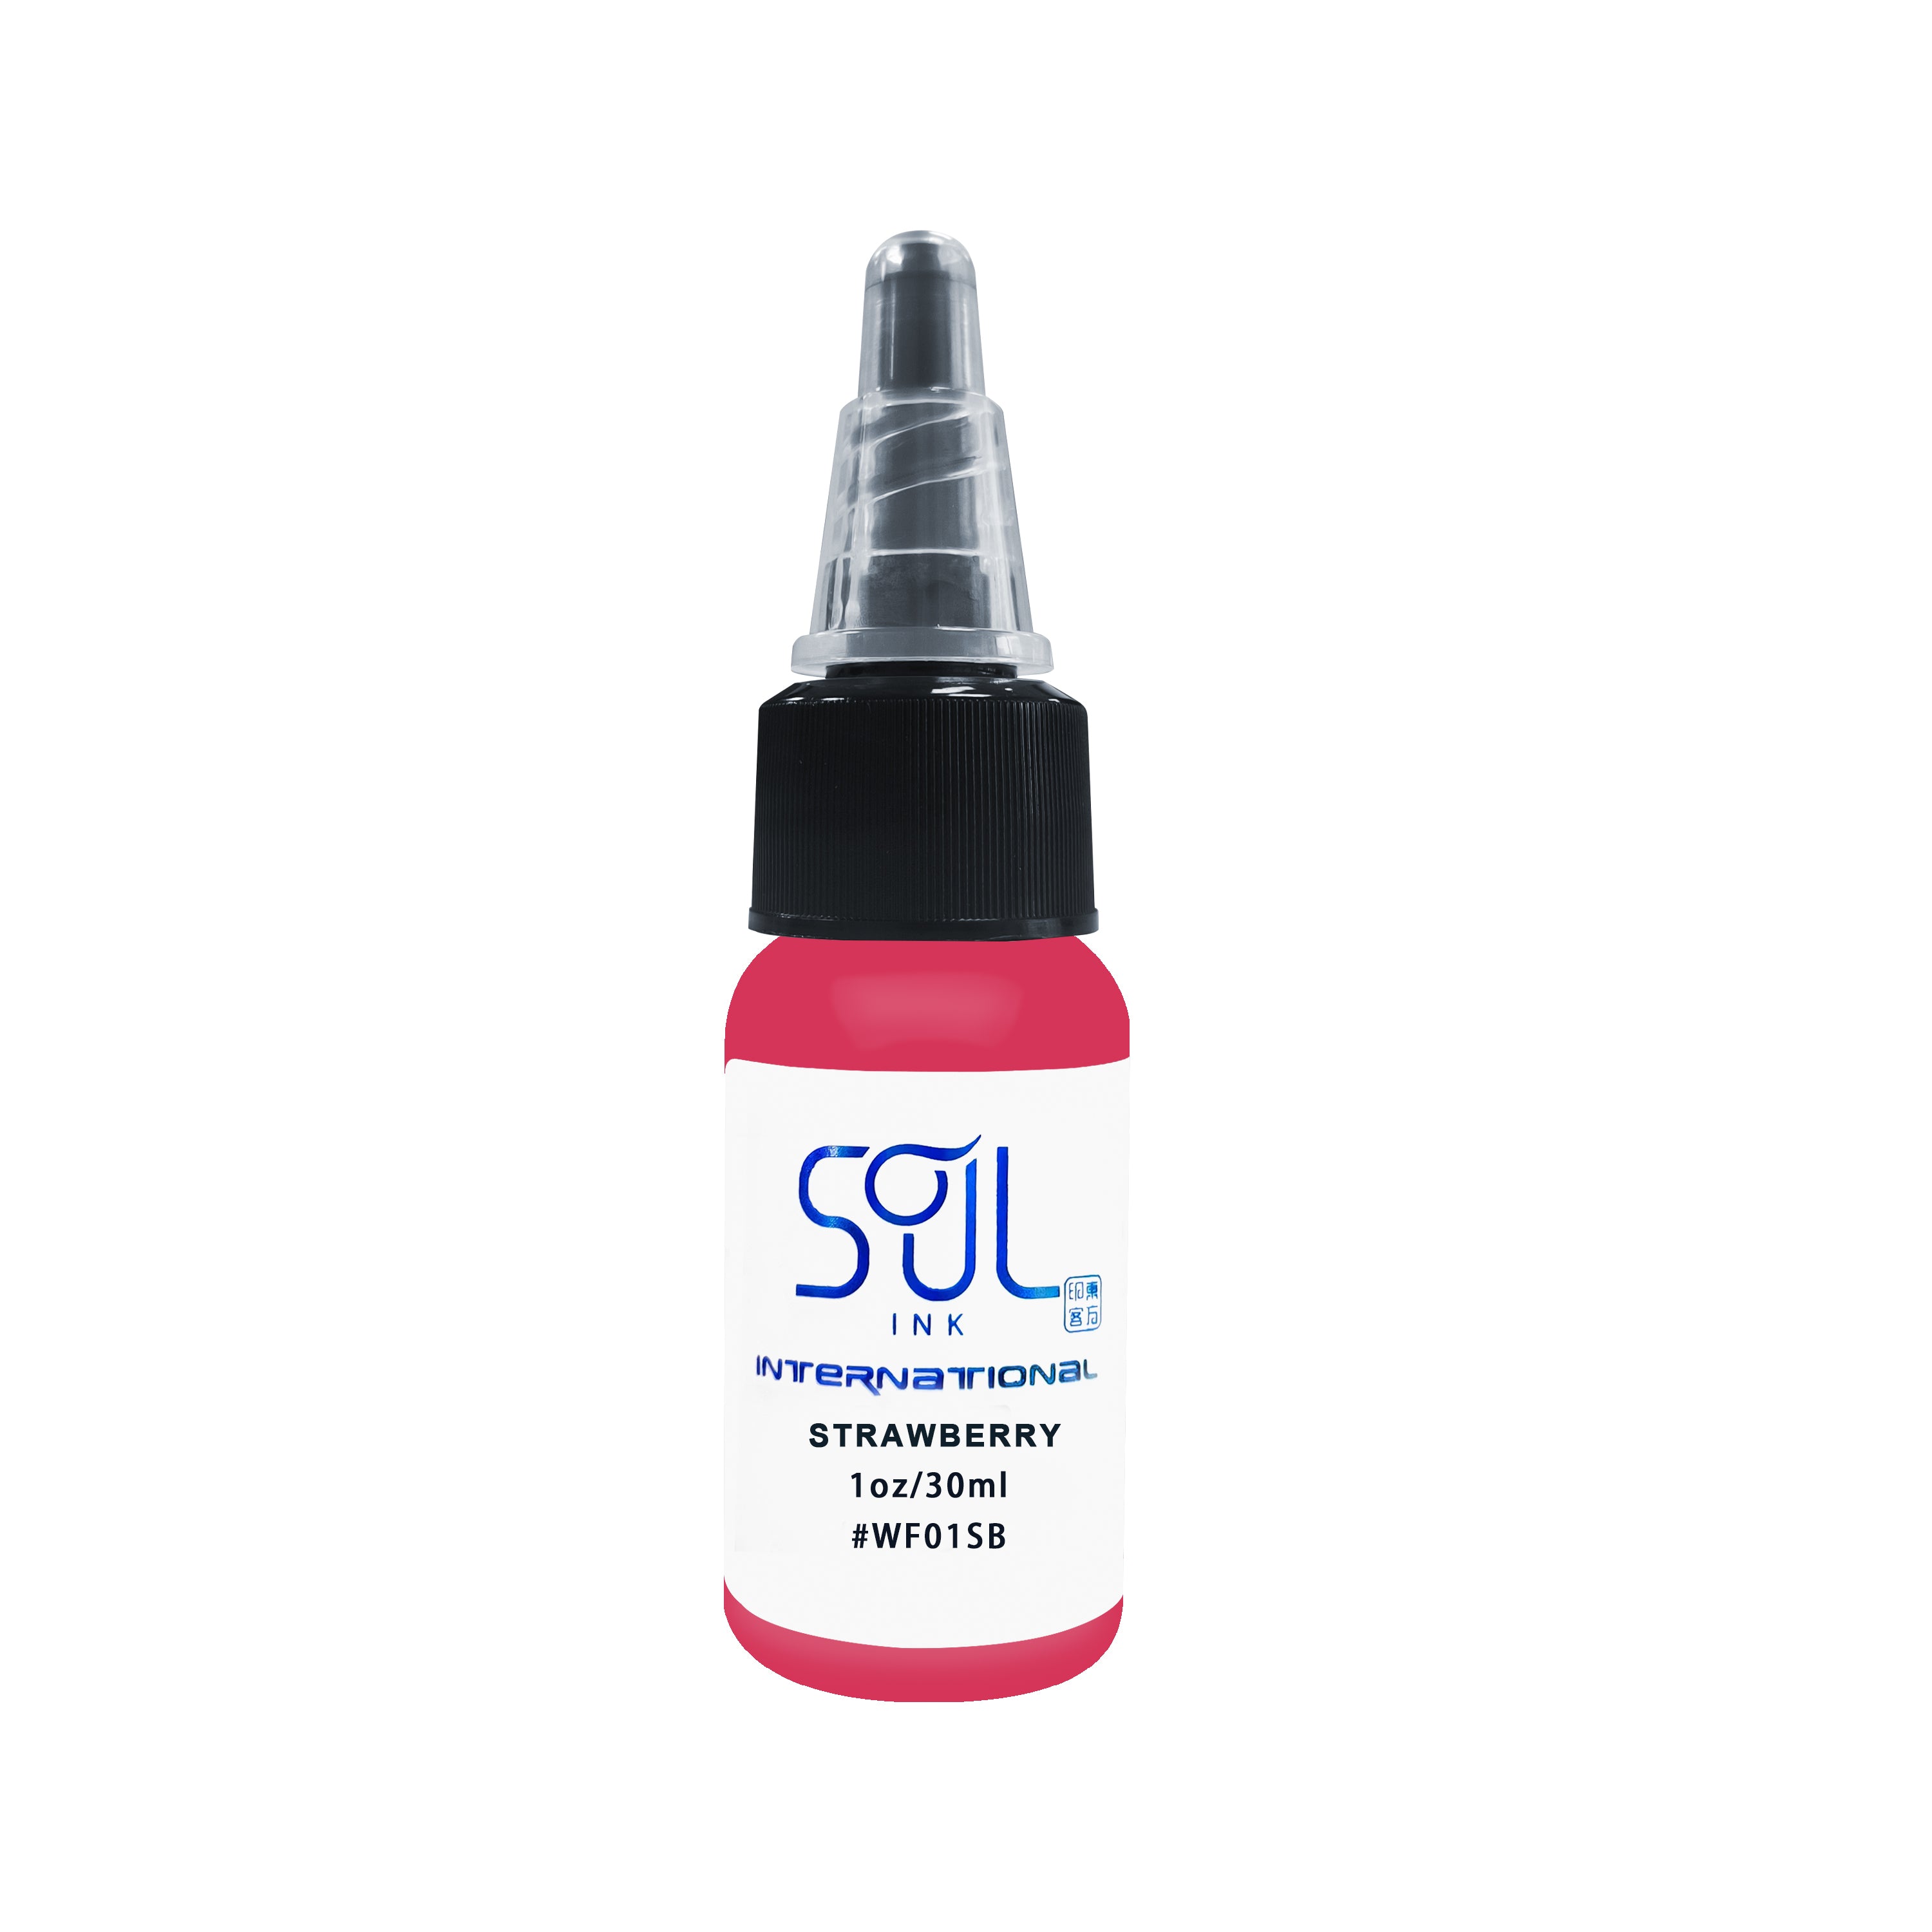 Photograph of a bottle of 'Soul Ink' brand strawberry ink. The label prominently displays the brand name 'Soul Ink' in stylish blue typography against a white background. The strawberry 30 ml bottle with a white label featuring the brands name 'Soul Ink'.